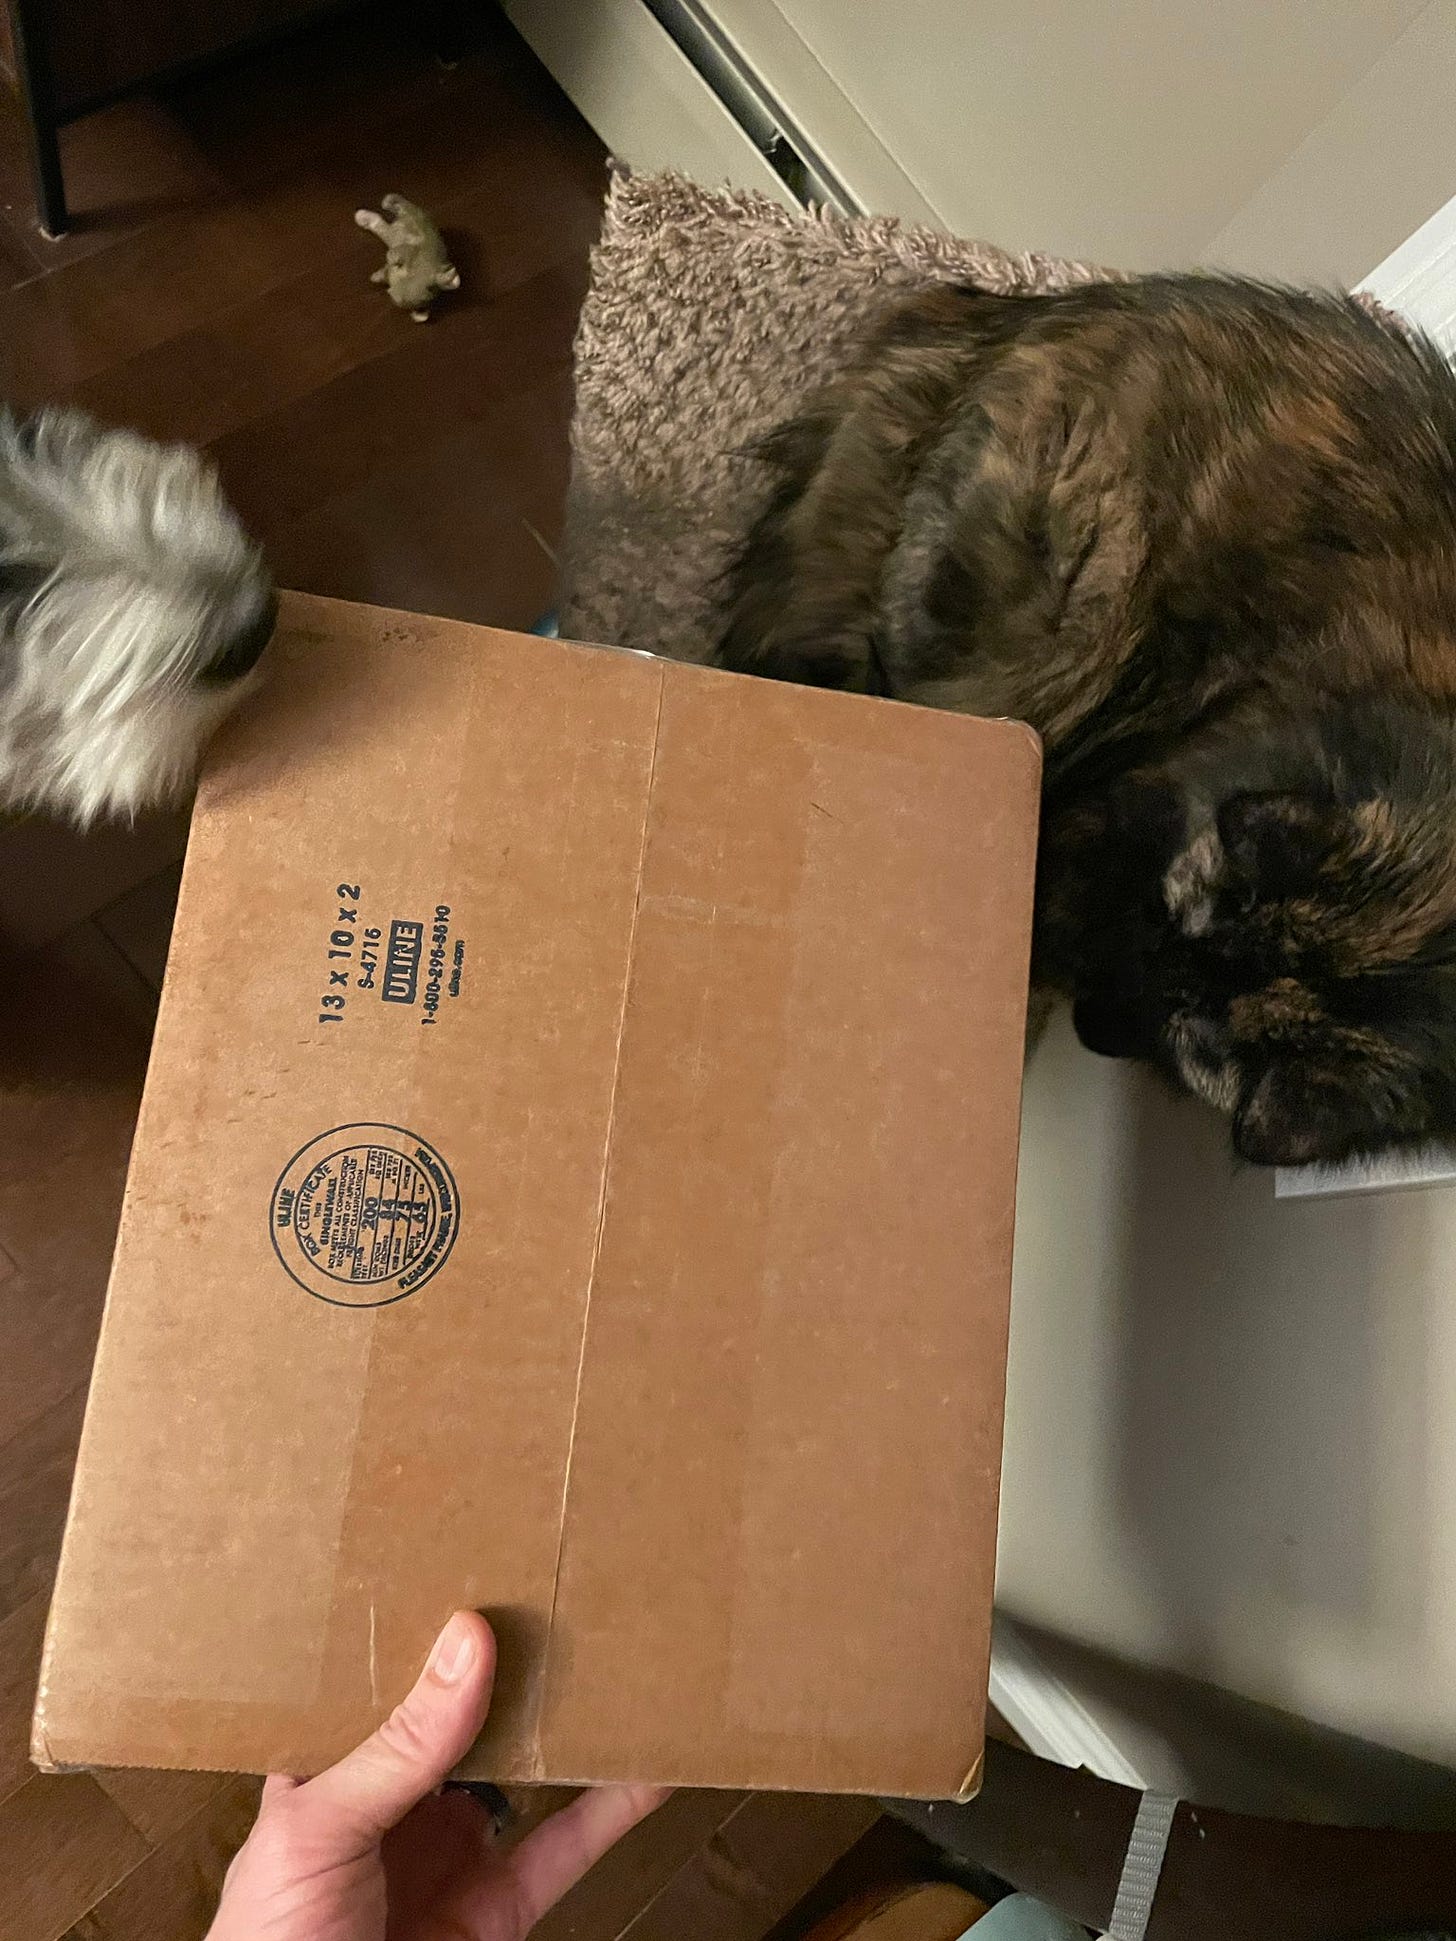 A bernadoodle puppy and a tortoiseshell cat examine a shipping box.